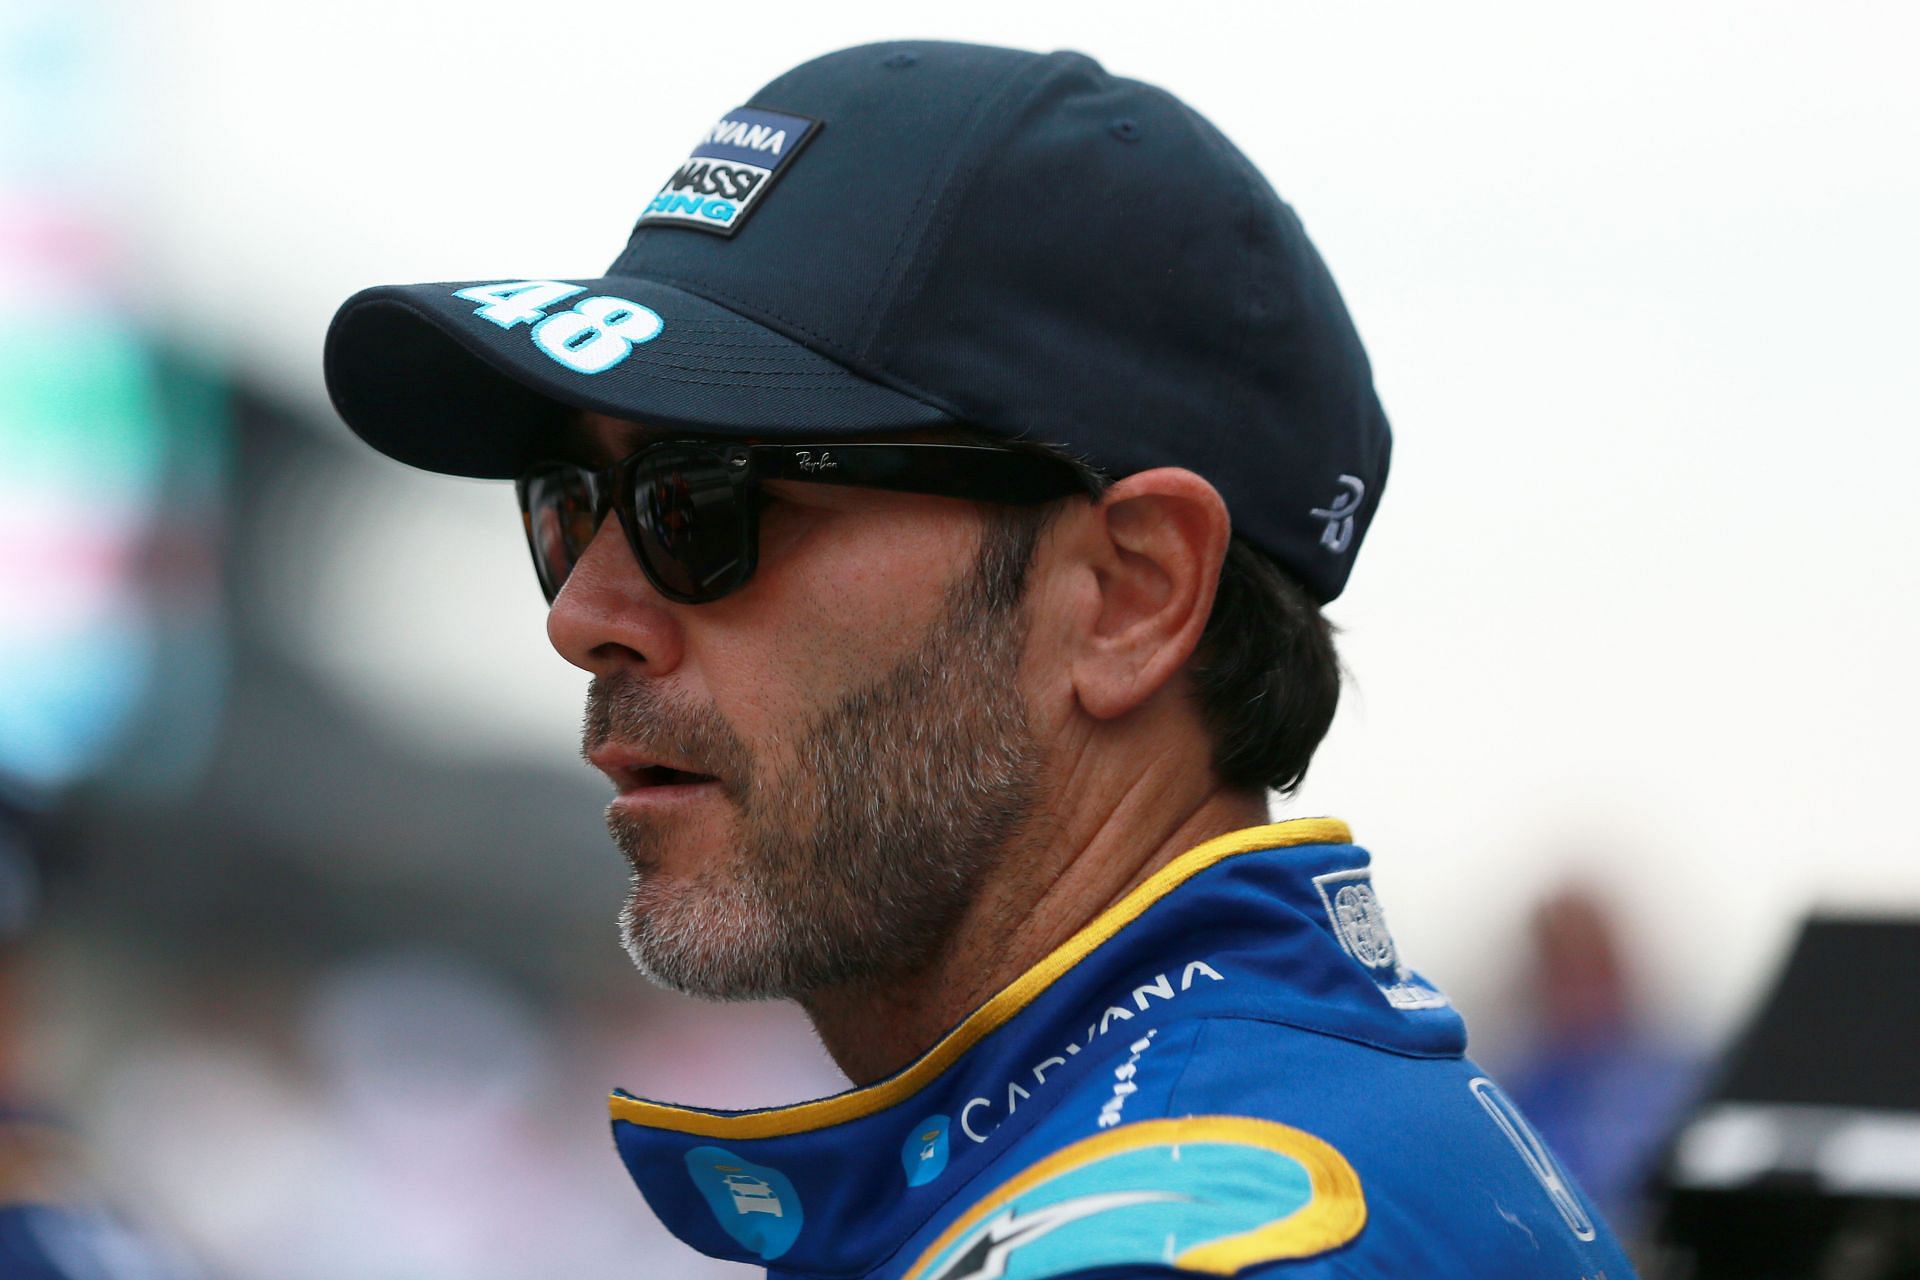 Jimmie Johnson, former NASCAR driver and now IndyCar driver